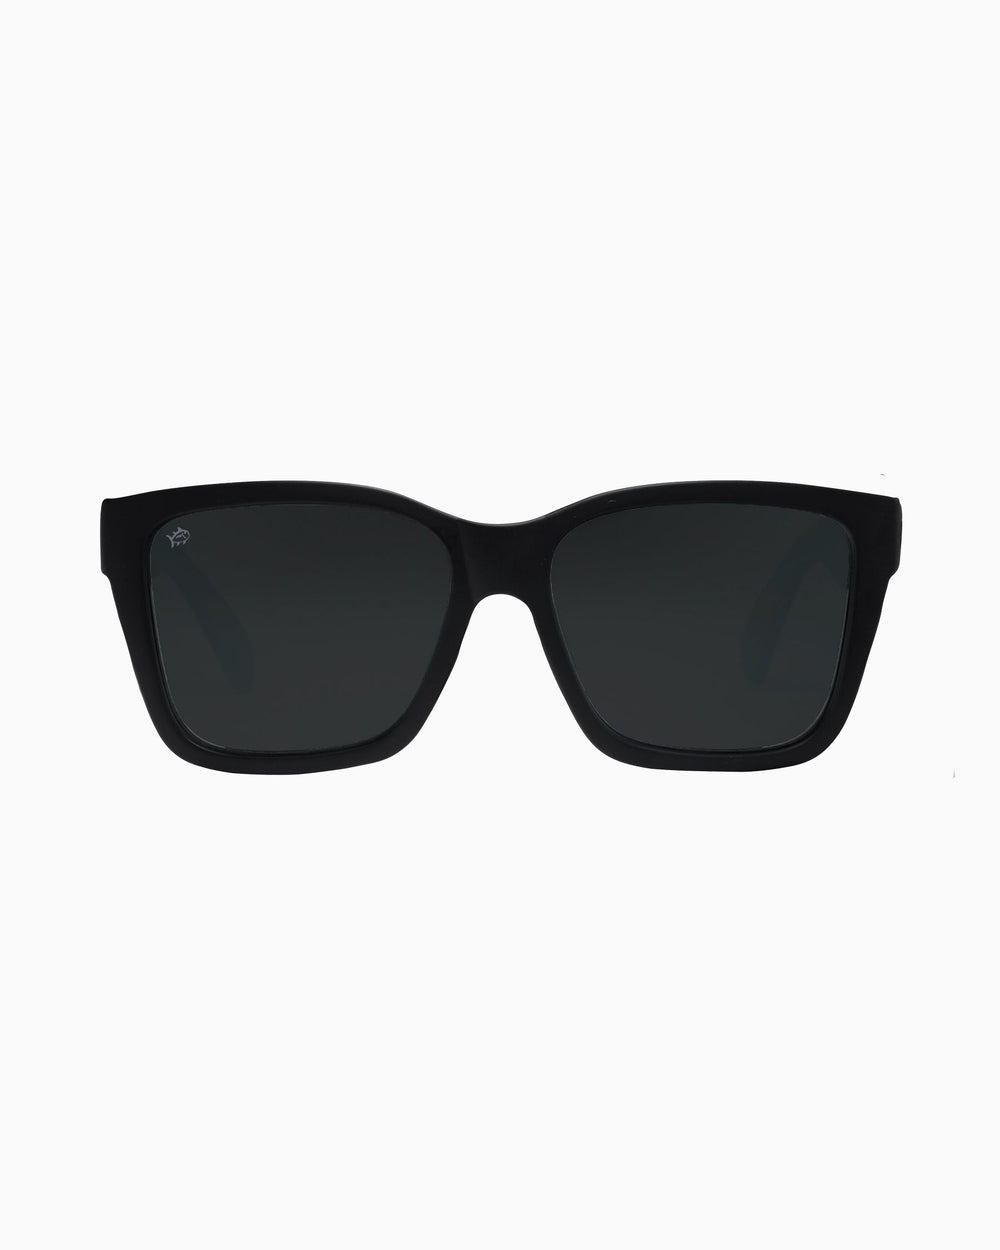 The front of the Rheos Edistos Sunglasses by Southern Tide - Gunmetal